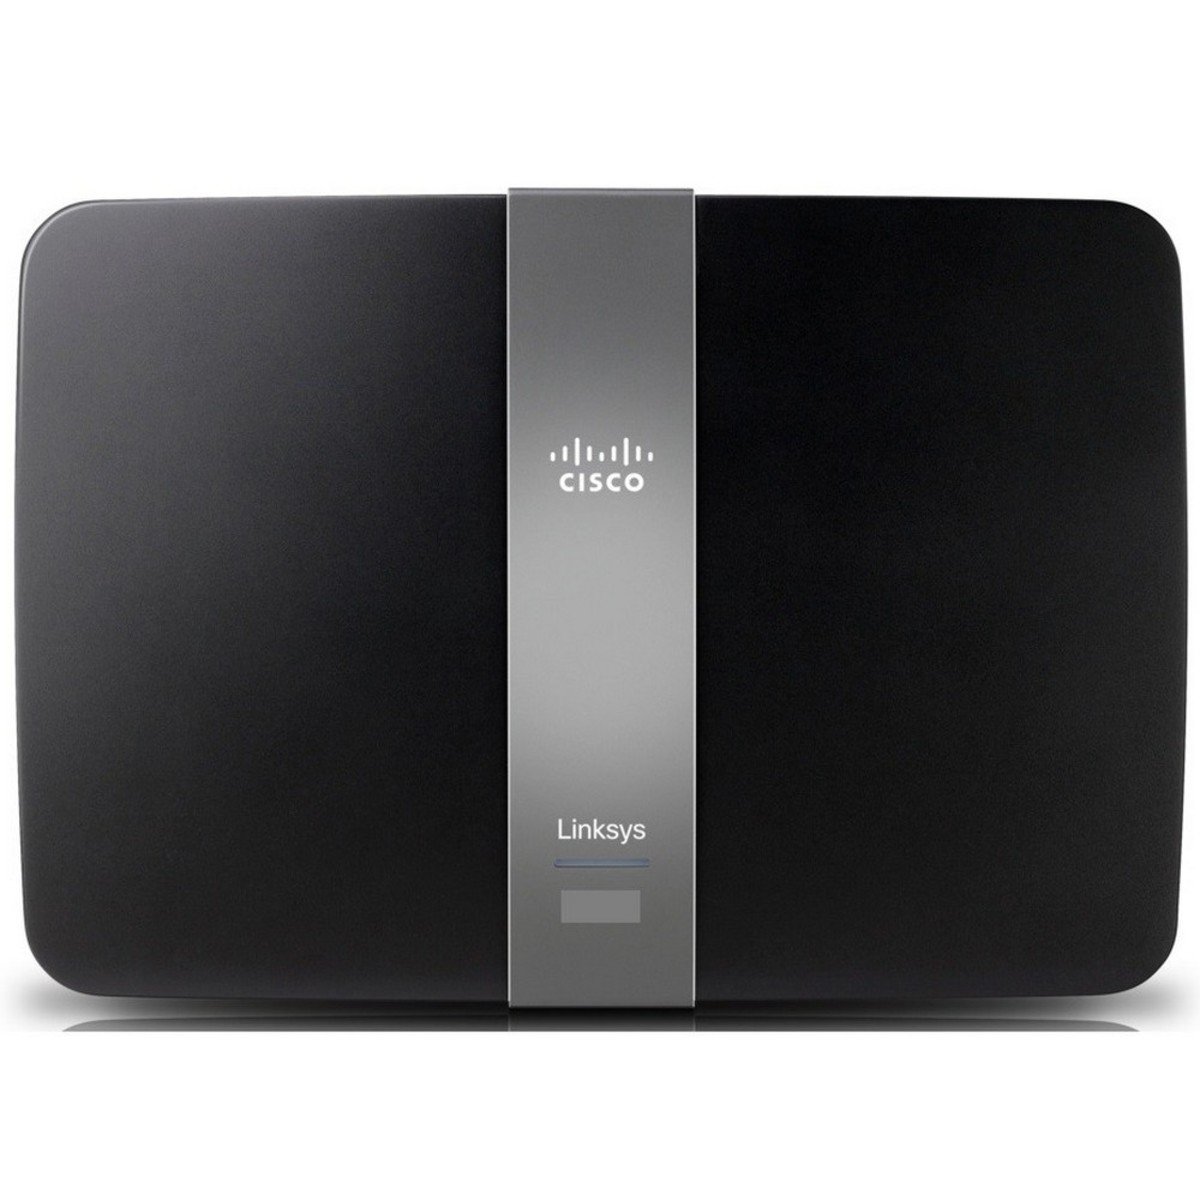 Linksys Dual Band WiFi Router EA6700